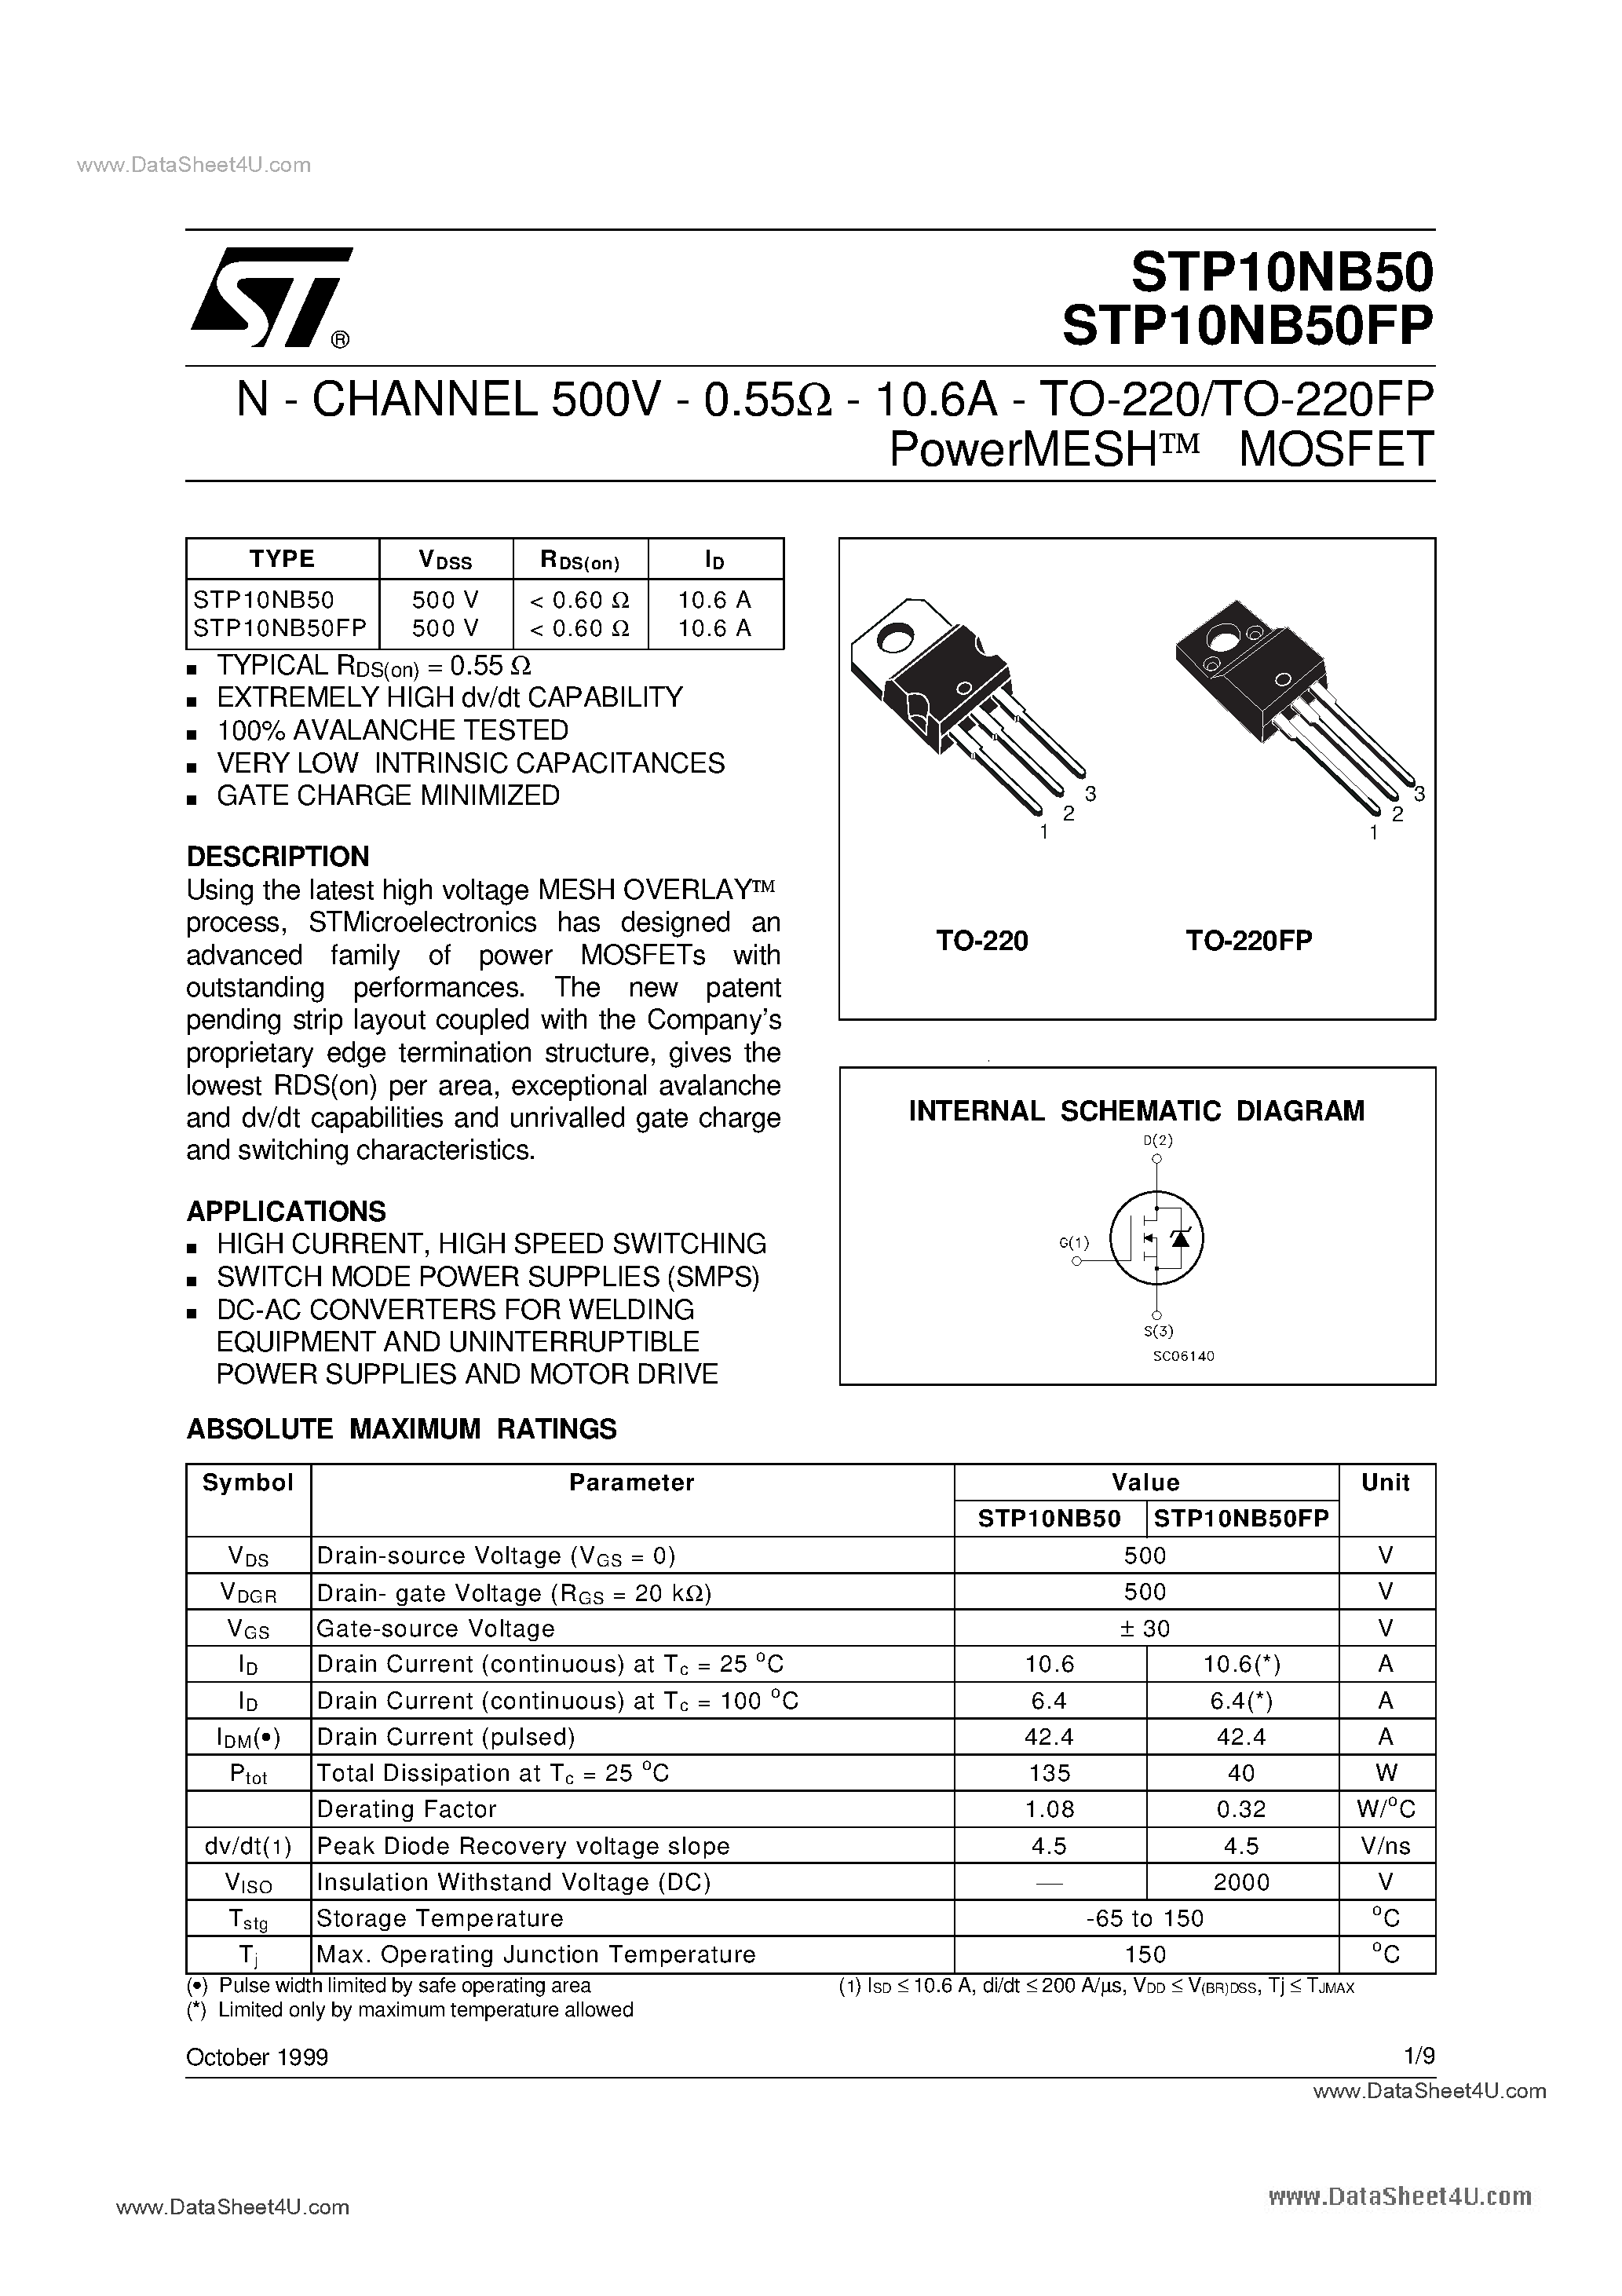 Datasheet P10NB50FP - Search -----> STP10NB50FP page 1